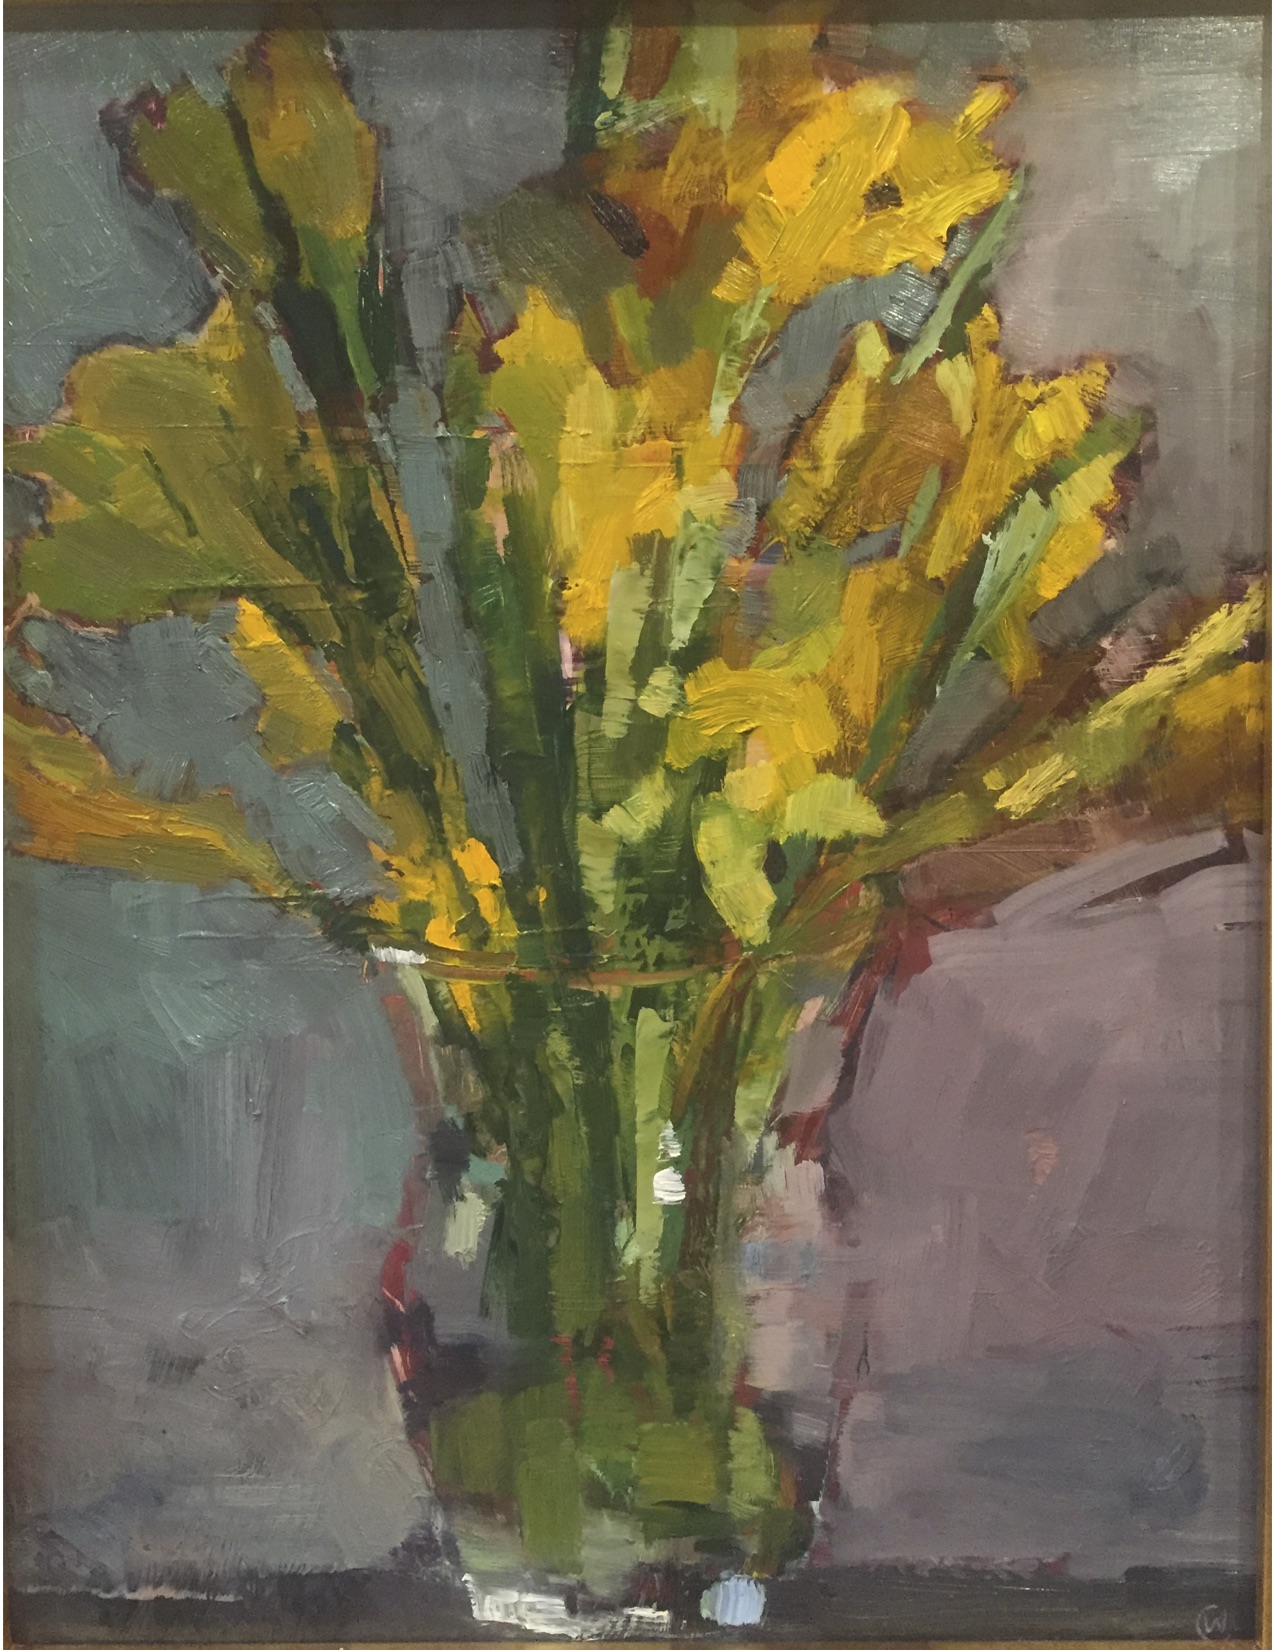 Narcissus Bouquet, Oil on board, Size: 8x10, SOLD